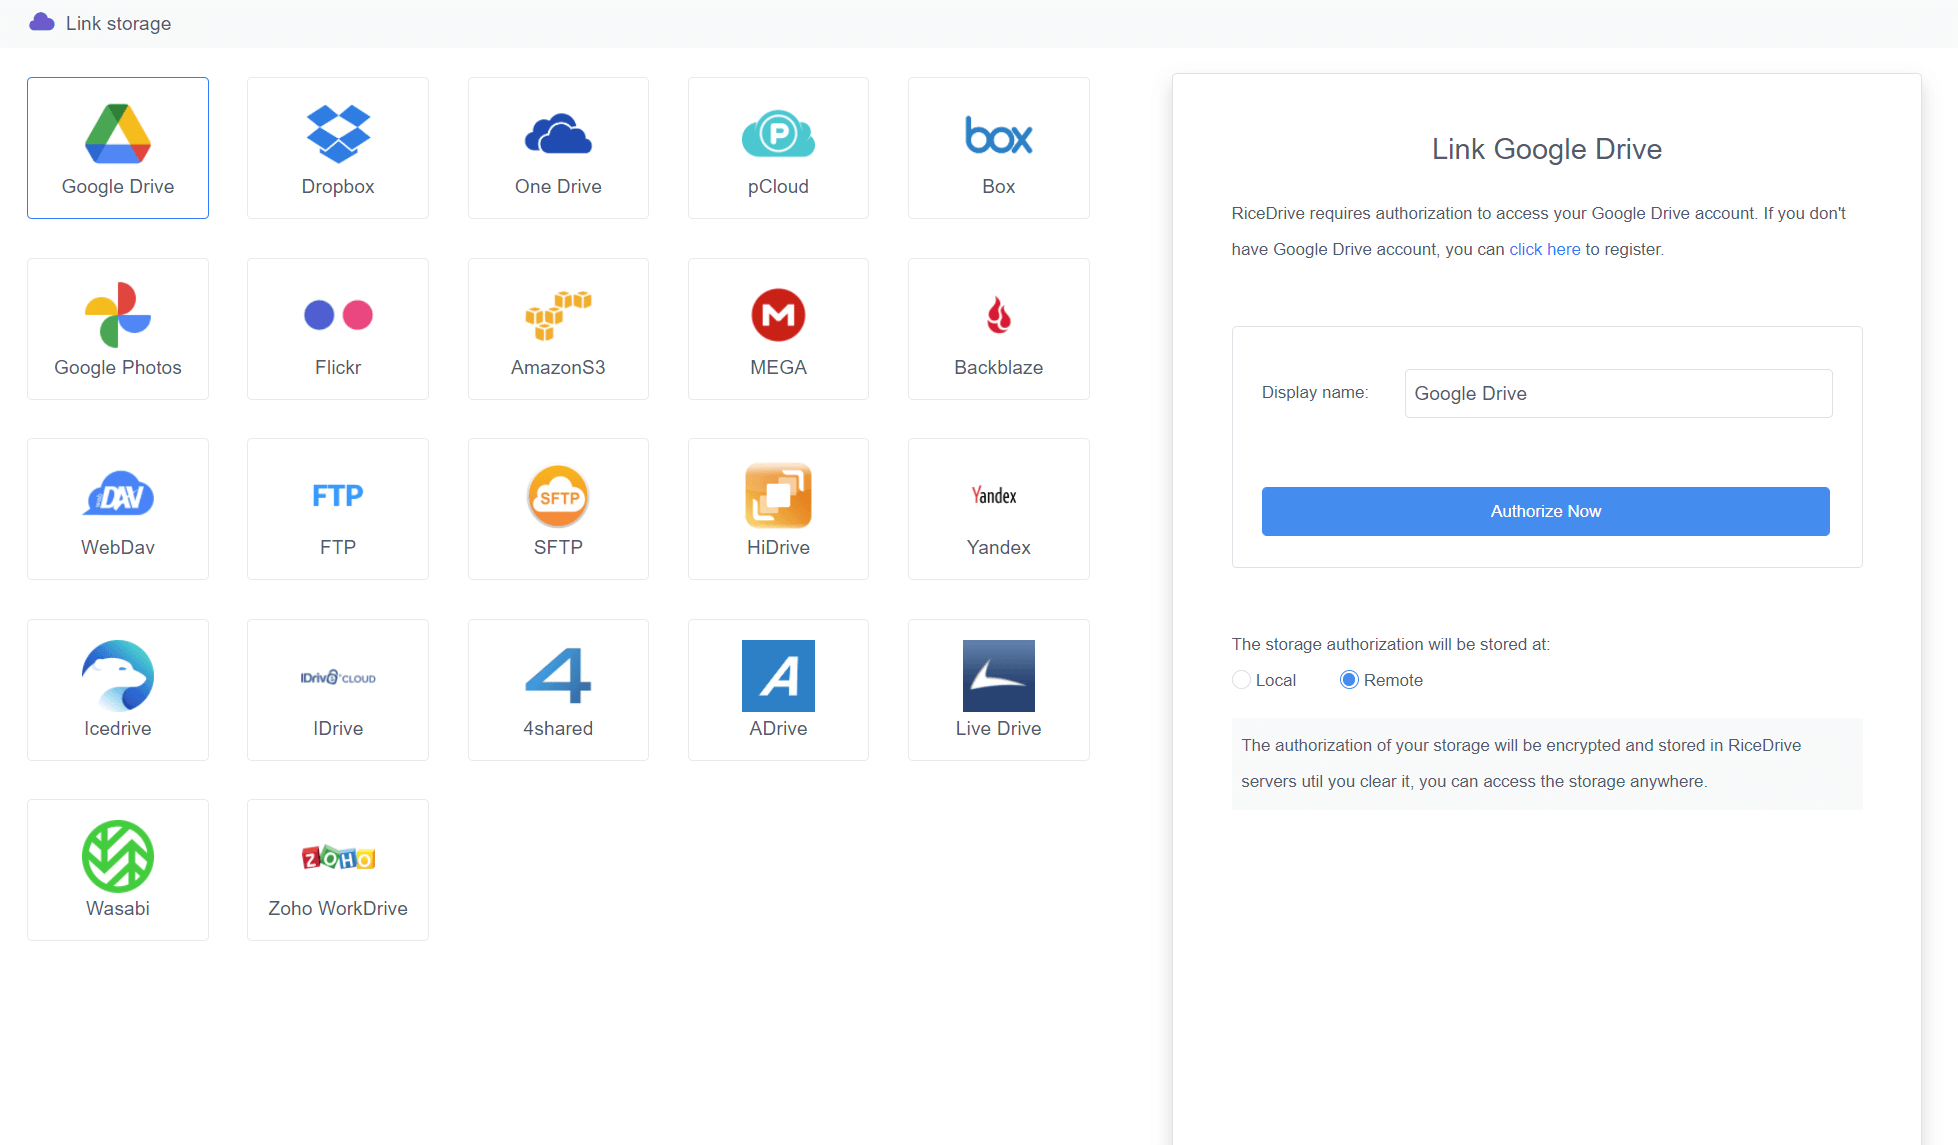 List of cloud drives supported by ricedrive